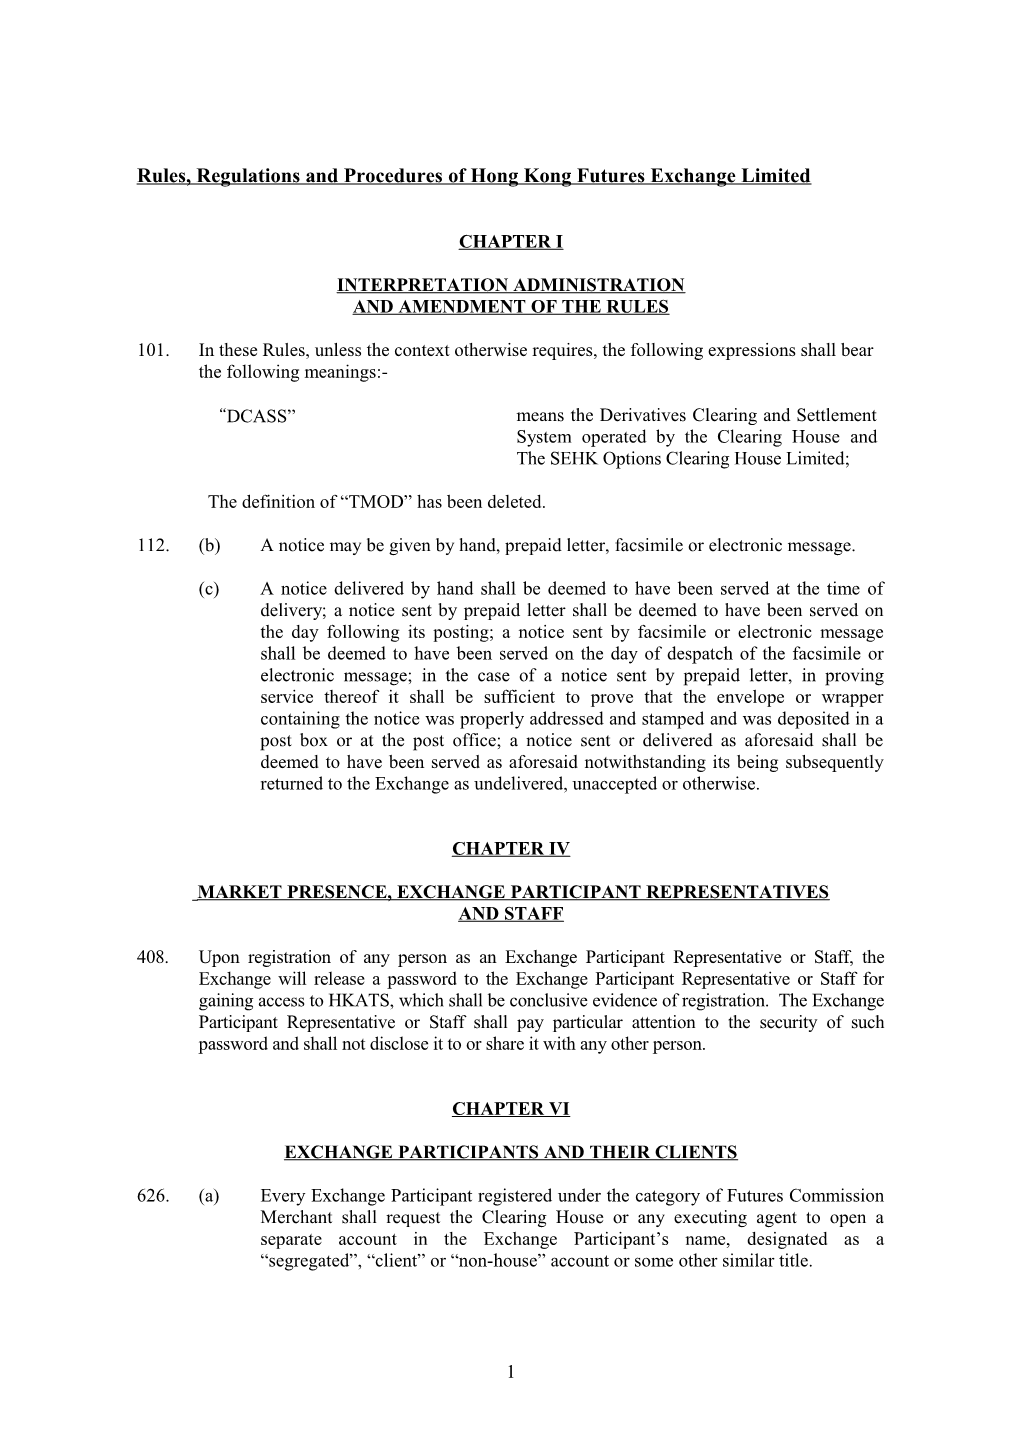 Proposed Amendments to the Rules, Regulations and Procedures of Hong Kong Futures Exchange